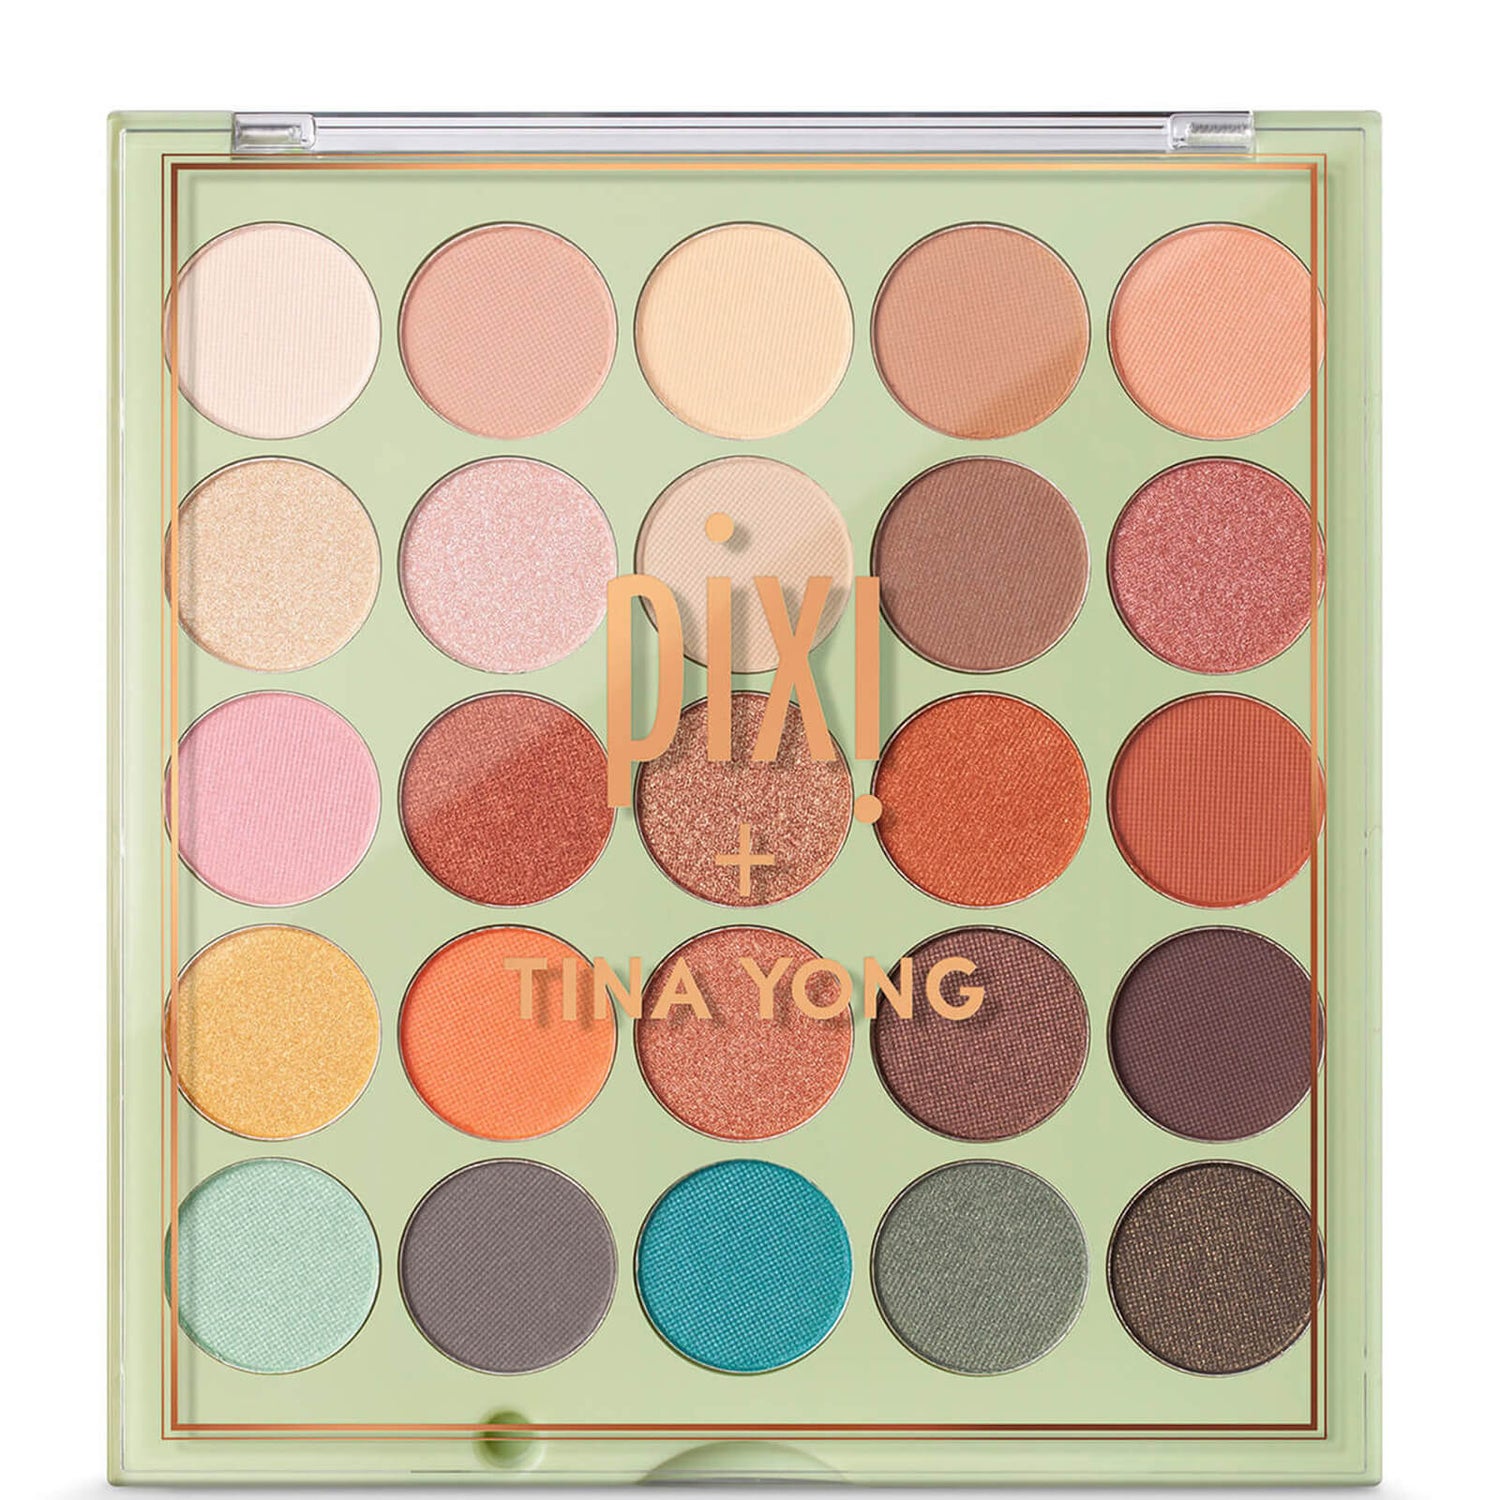 PIXI Tina Yong Tones and Textures Eyeshadow Palette 22g